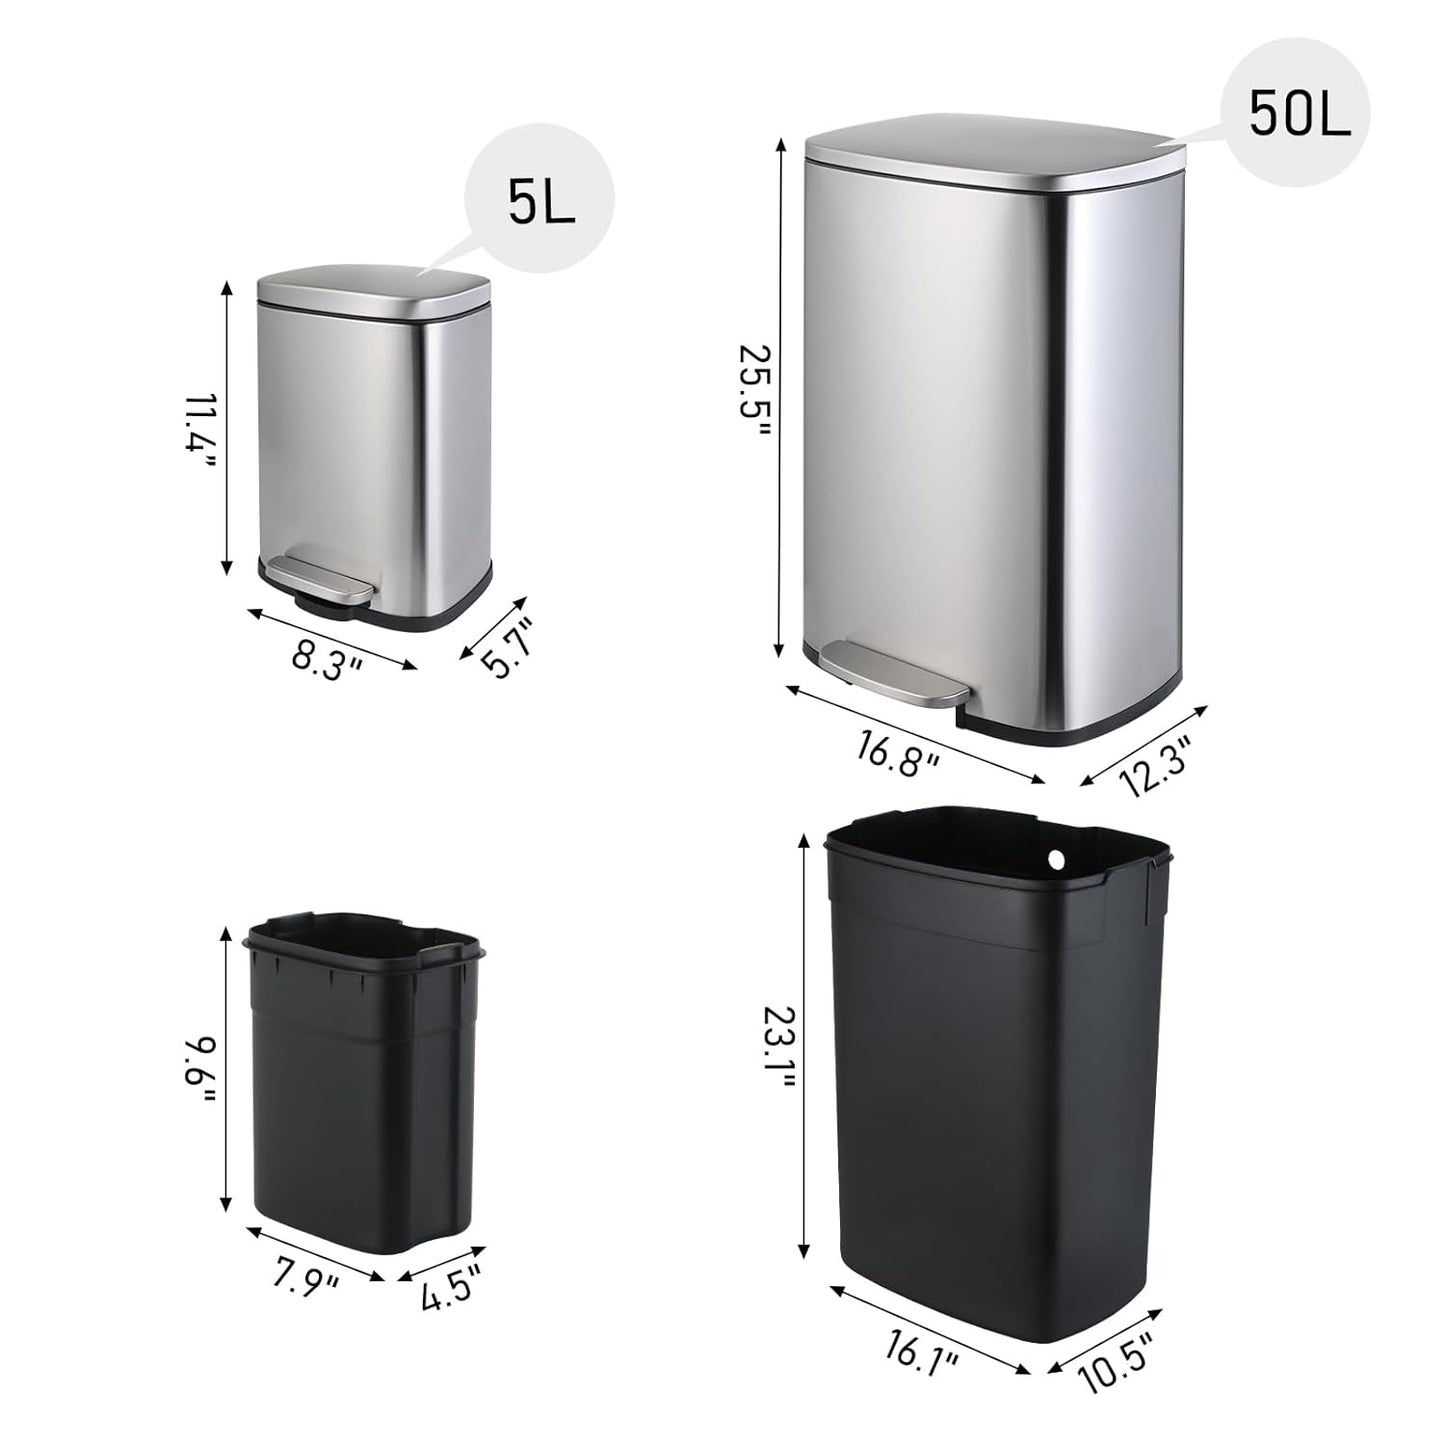 Arlopu 13.2+1.3 Gallon Step Trash Can, Stainless Steel Garbage Bin, Soft-Close Rubbish Bin with Removable Plastic Inner Bucket, Fingerprint-Proof Dustbin with Lid, for Kitchen